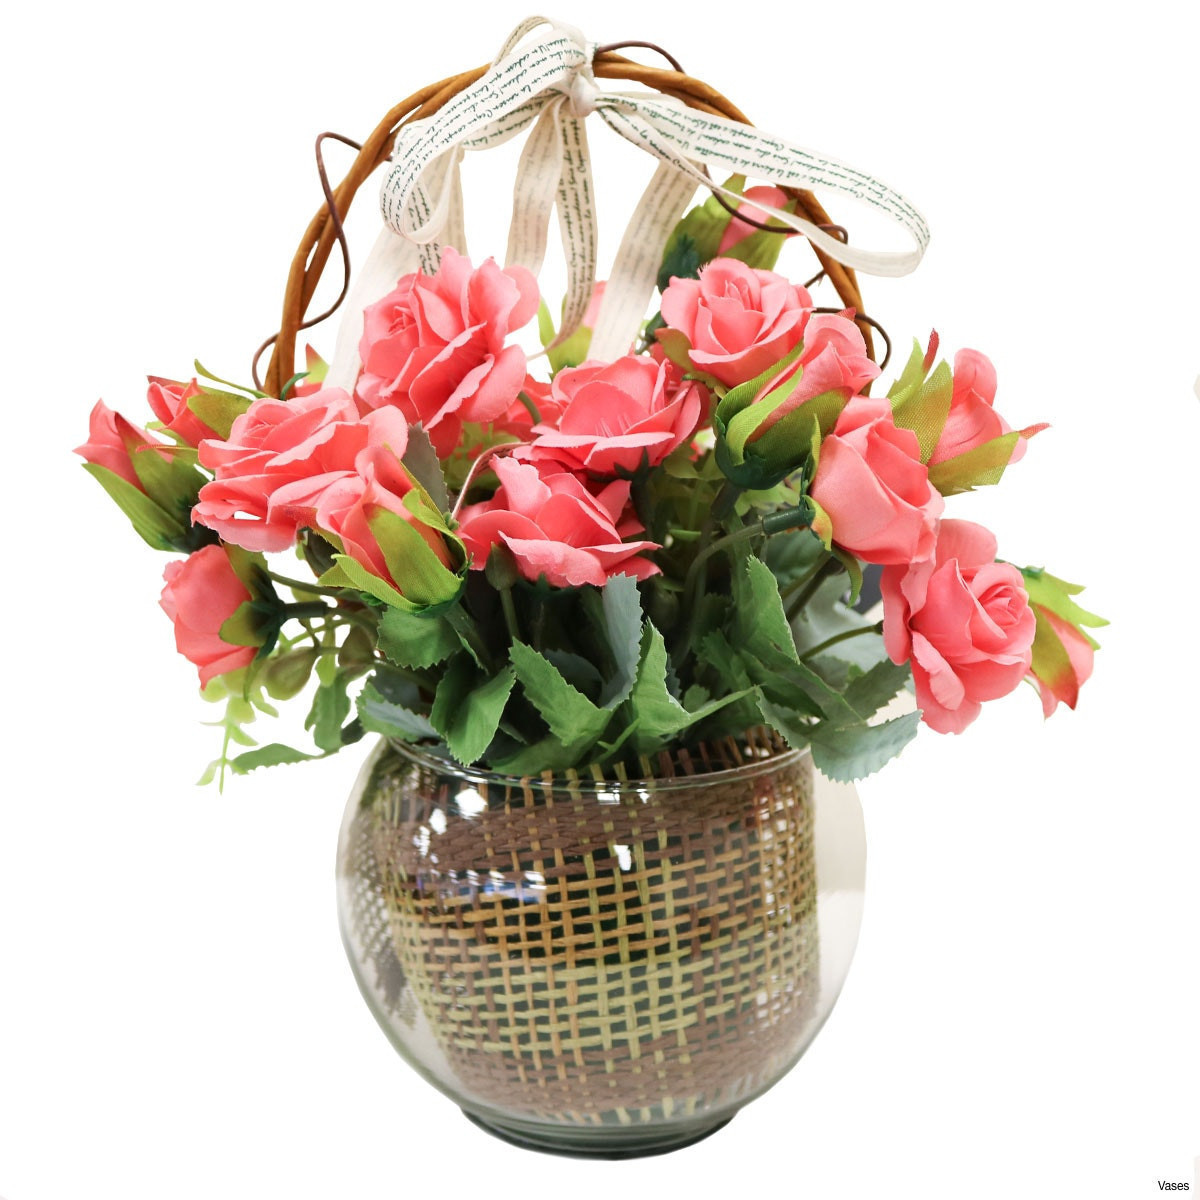 30 Famous Small Fake Flowers In Vase 2024 free download small fake flowers in vase of mini glass vase pics bf142 11km 1200x1200h vases pink flower vase i intended for bf142 11km 1200x1200h vases pink flower vase i 0d gold inspiration attention mi